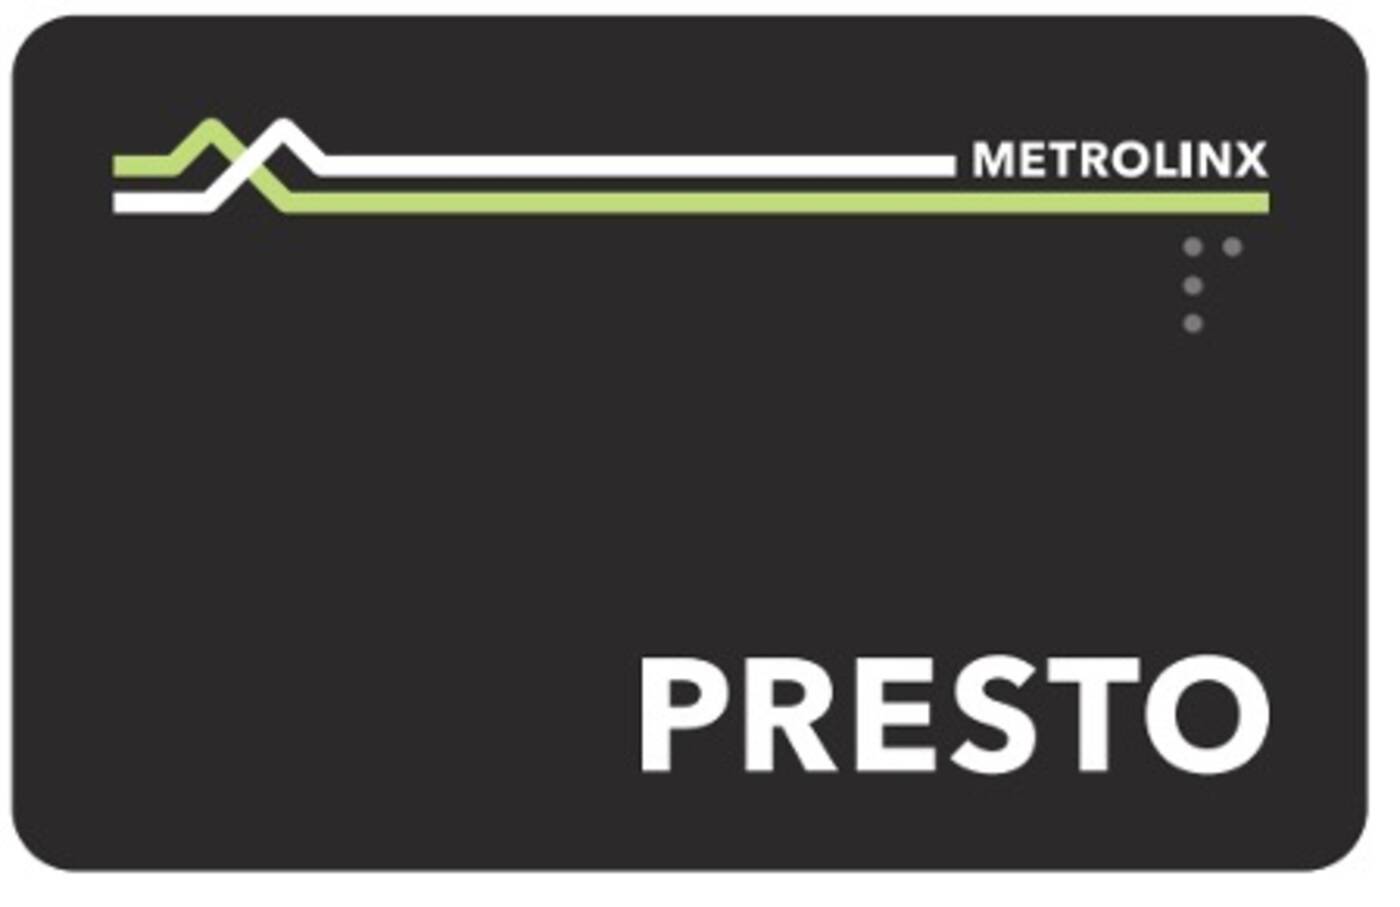 How Much Are Presto Cards